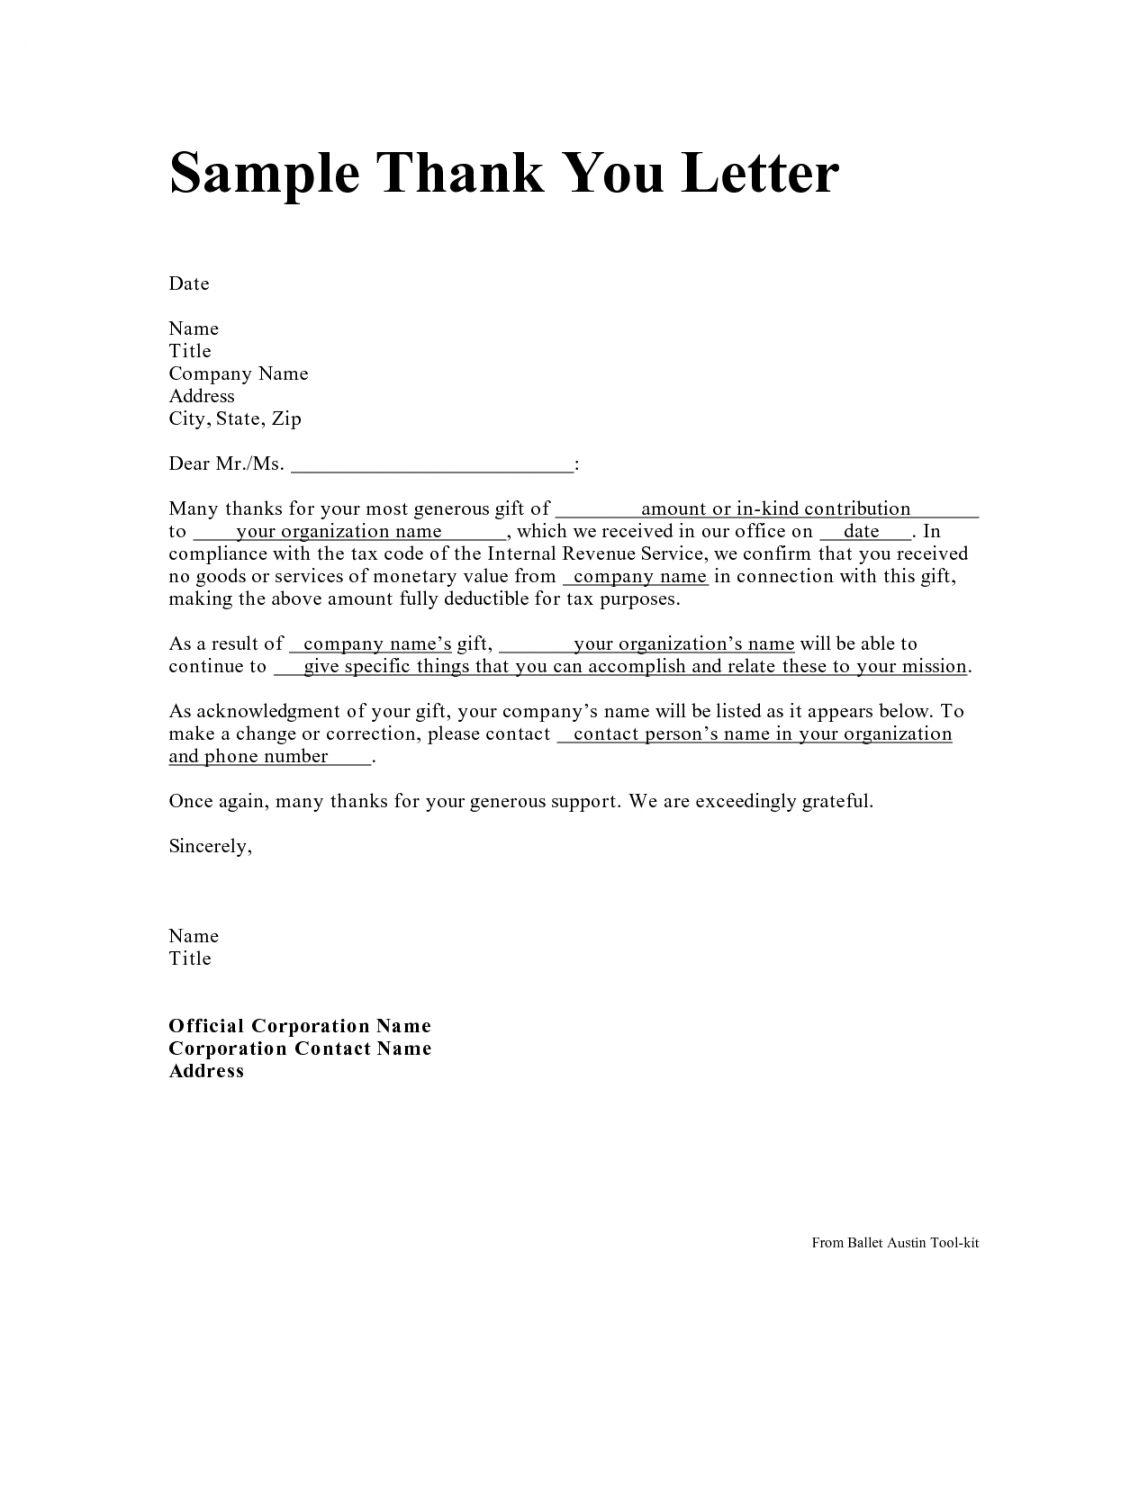 sample personal thank you letter  personal thank you letter professional thank you note template sample